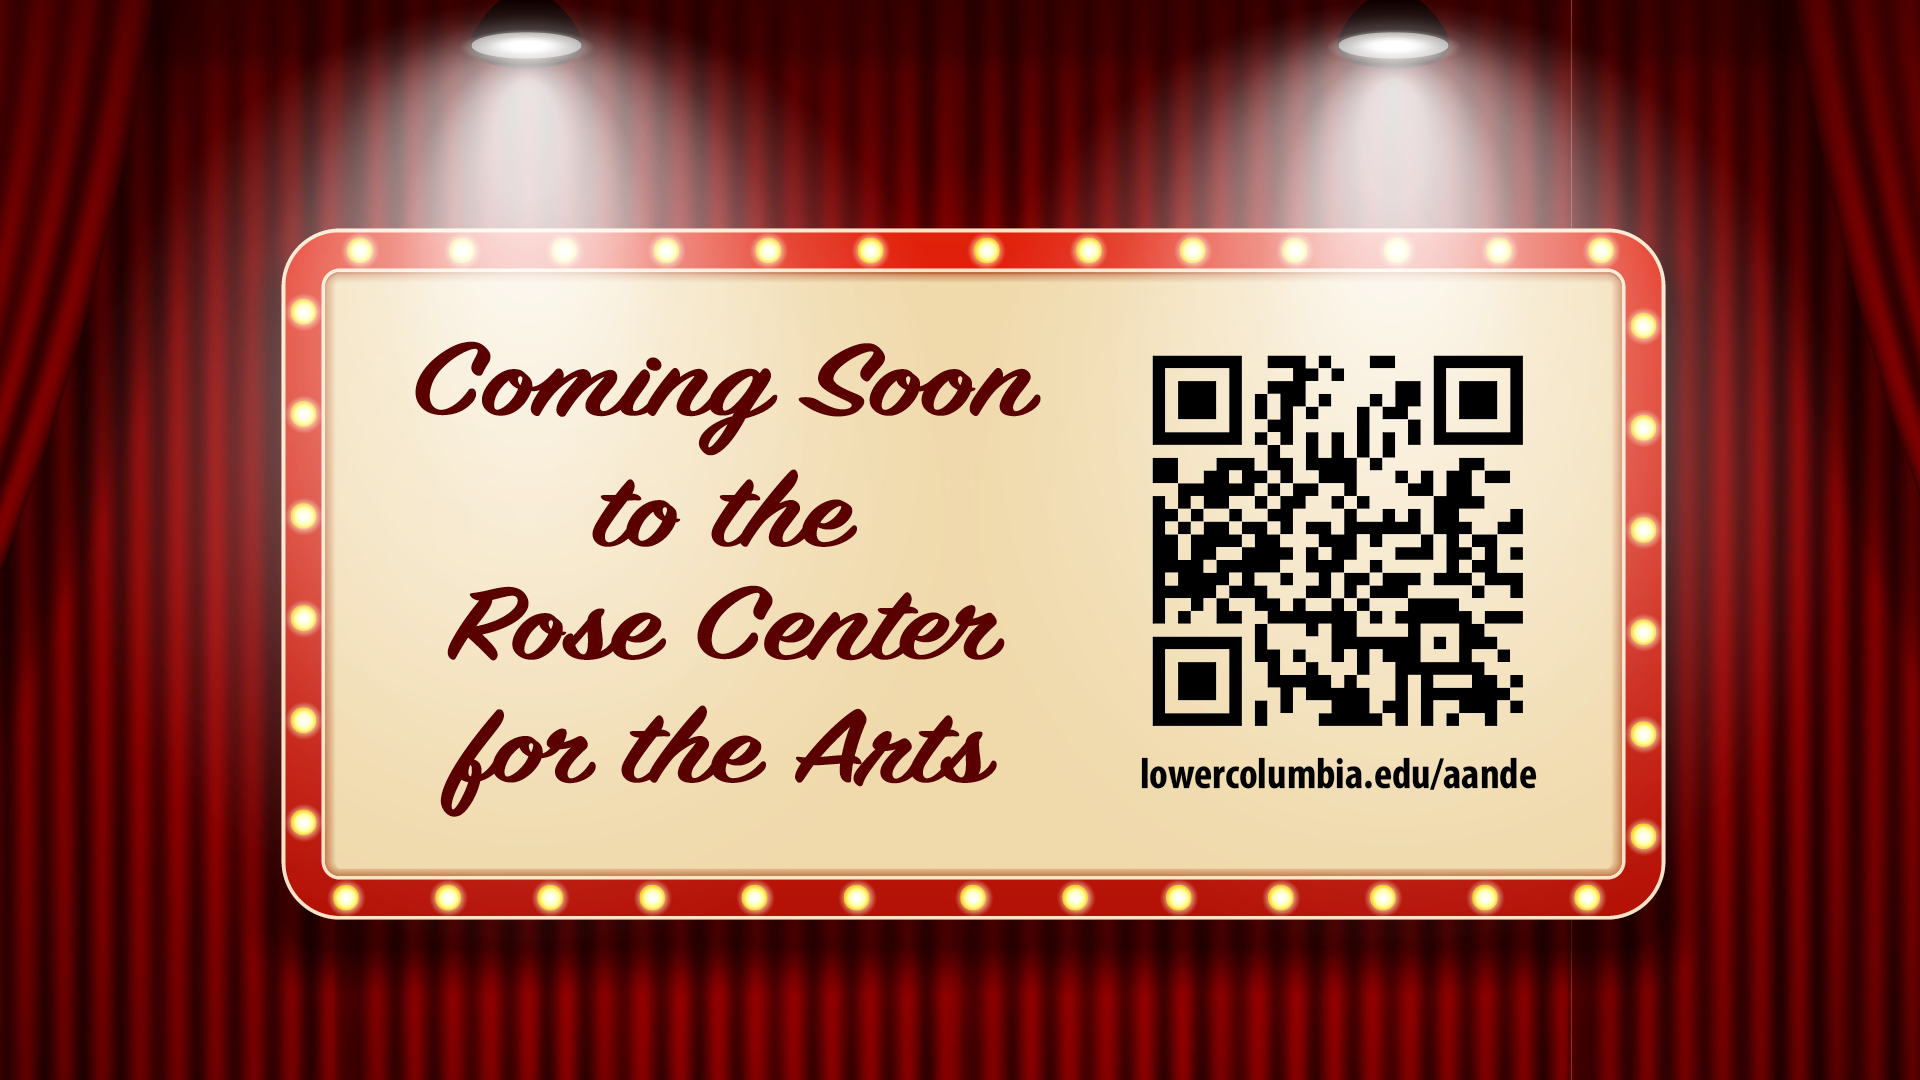 "coming soon to the rose center for the arts" with scannable QR code (lowercolumbia.edu/aande)